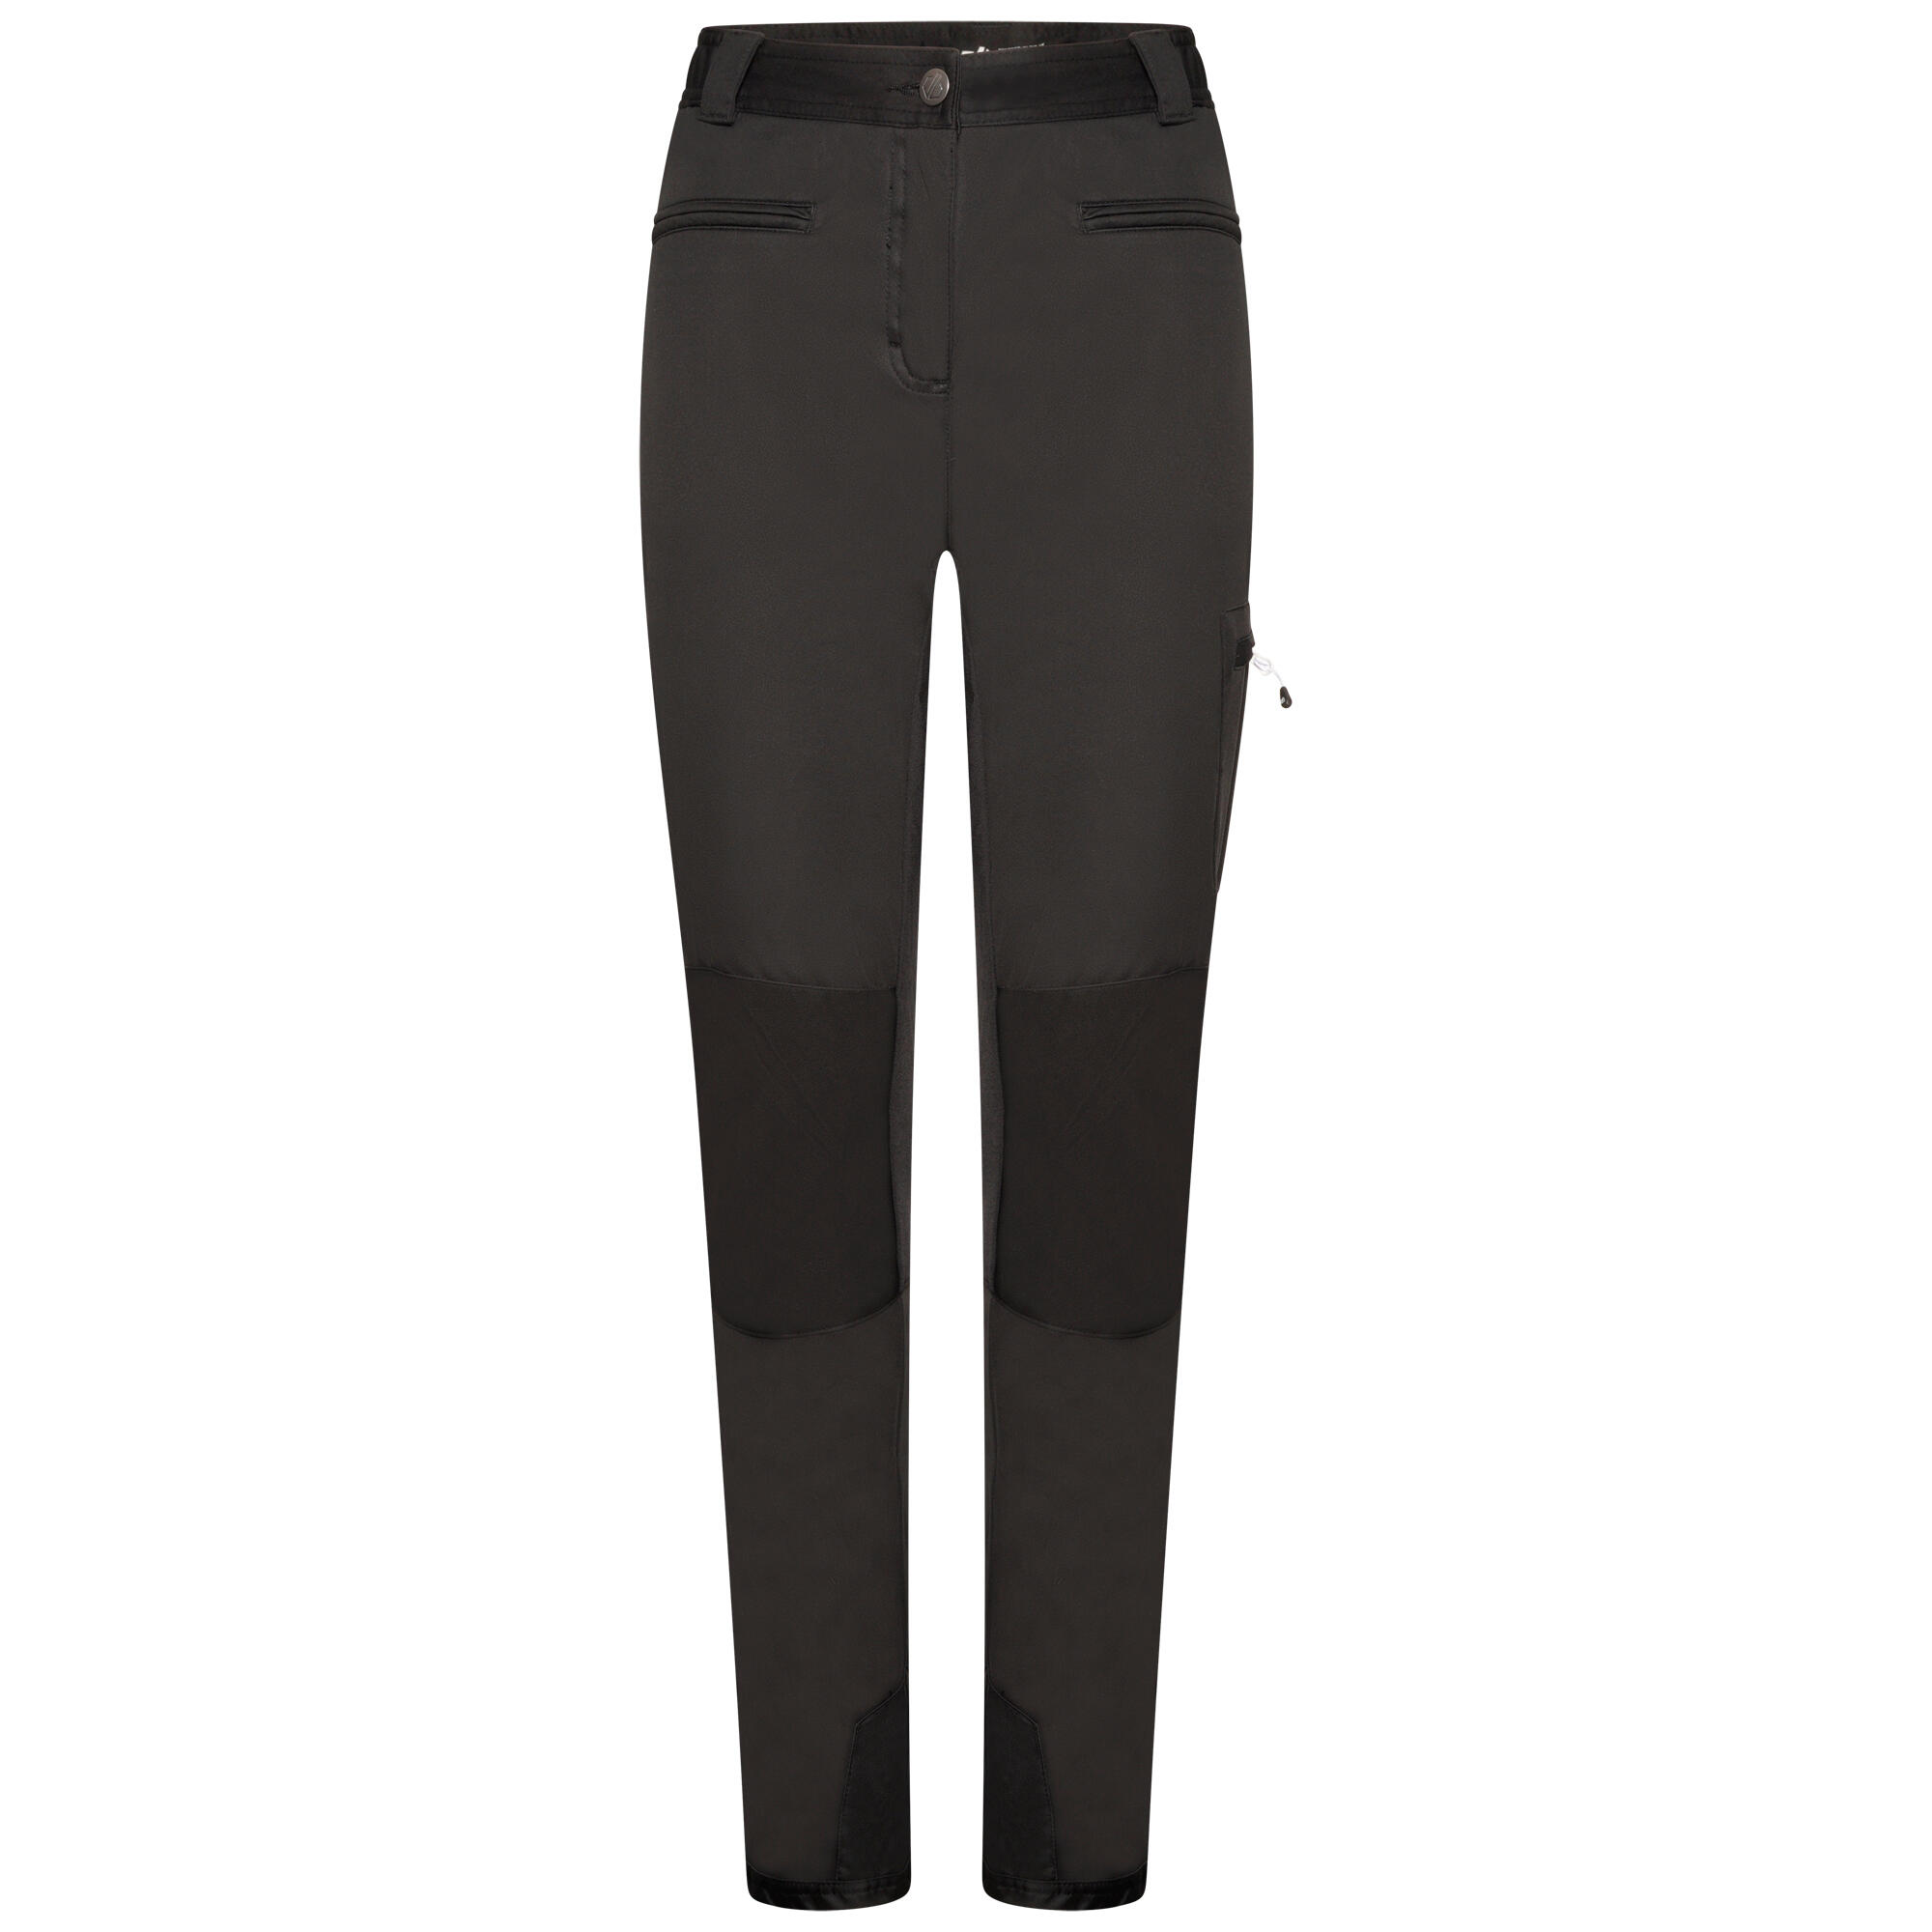 DARE 2B Appended II Women's Hiking Trousers - Black